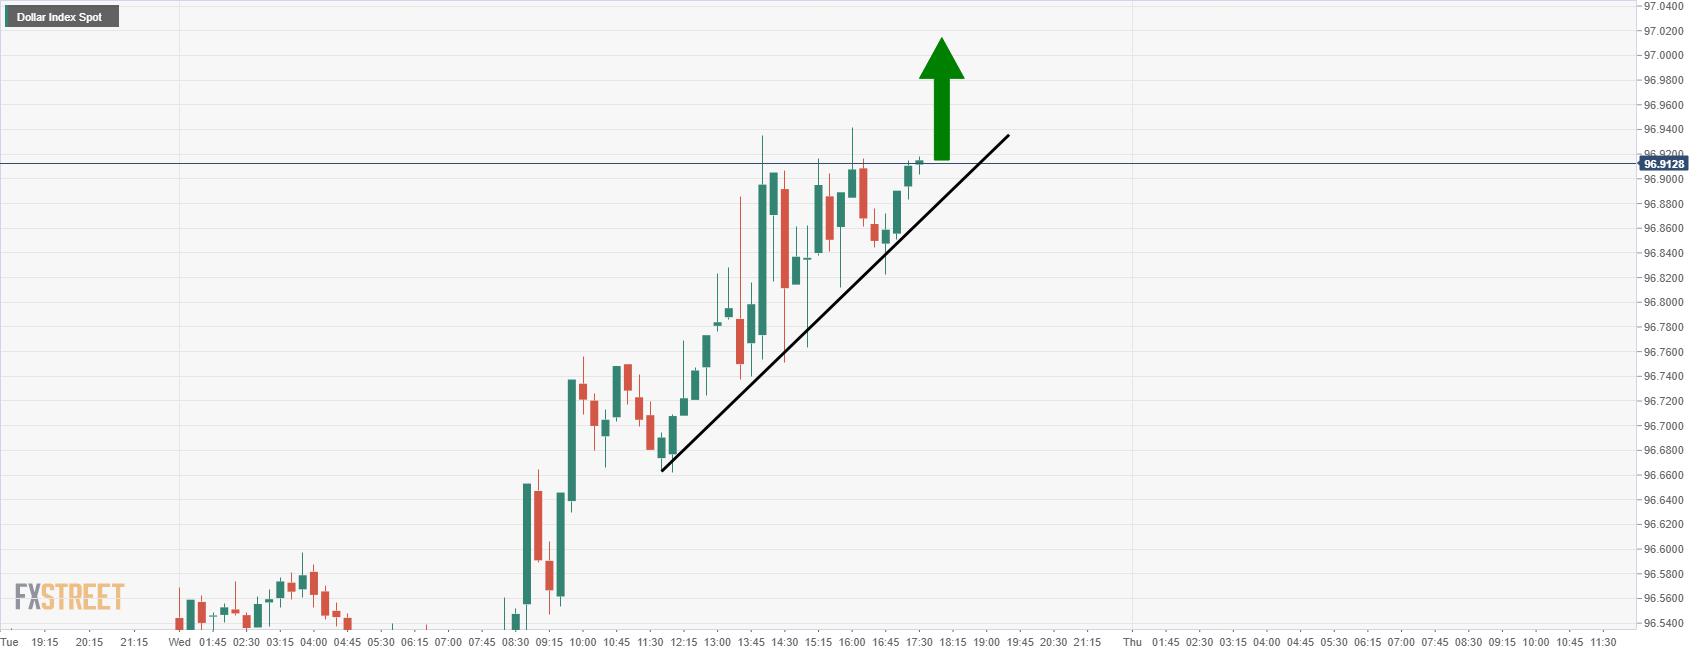 AUD/USD Price Analysis: Looking vulnerable around the FOMC minutes, 0.7170s eyed